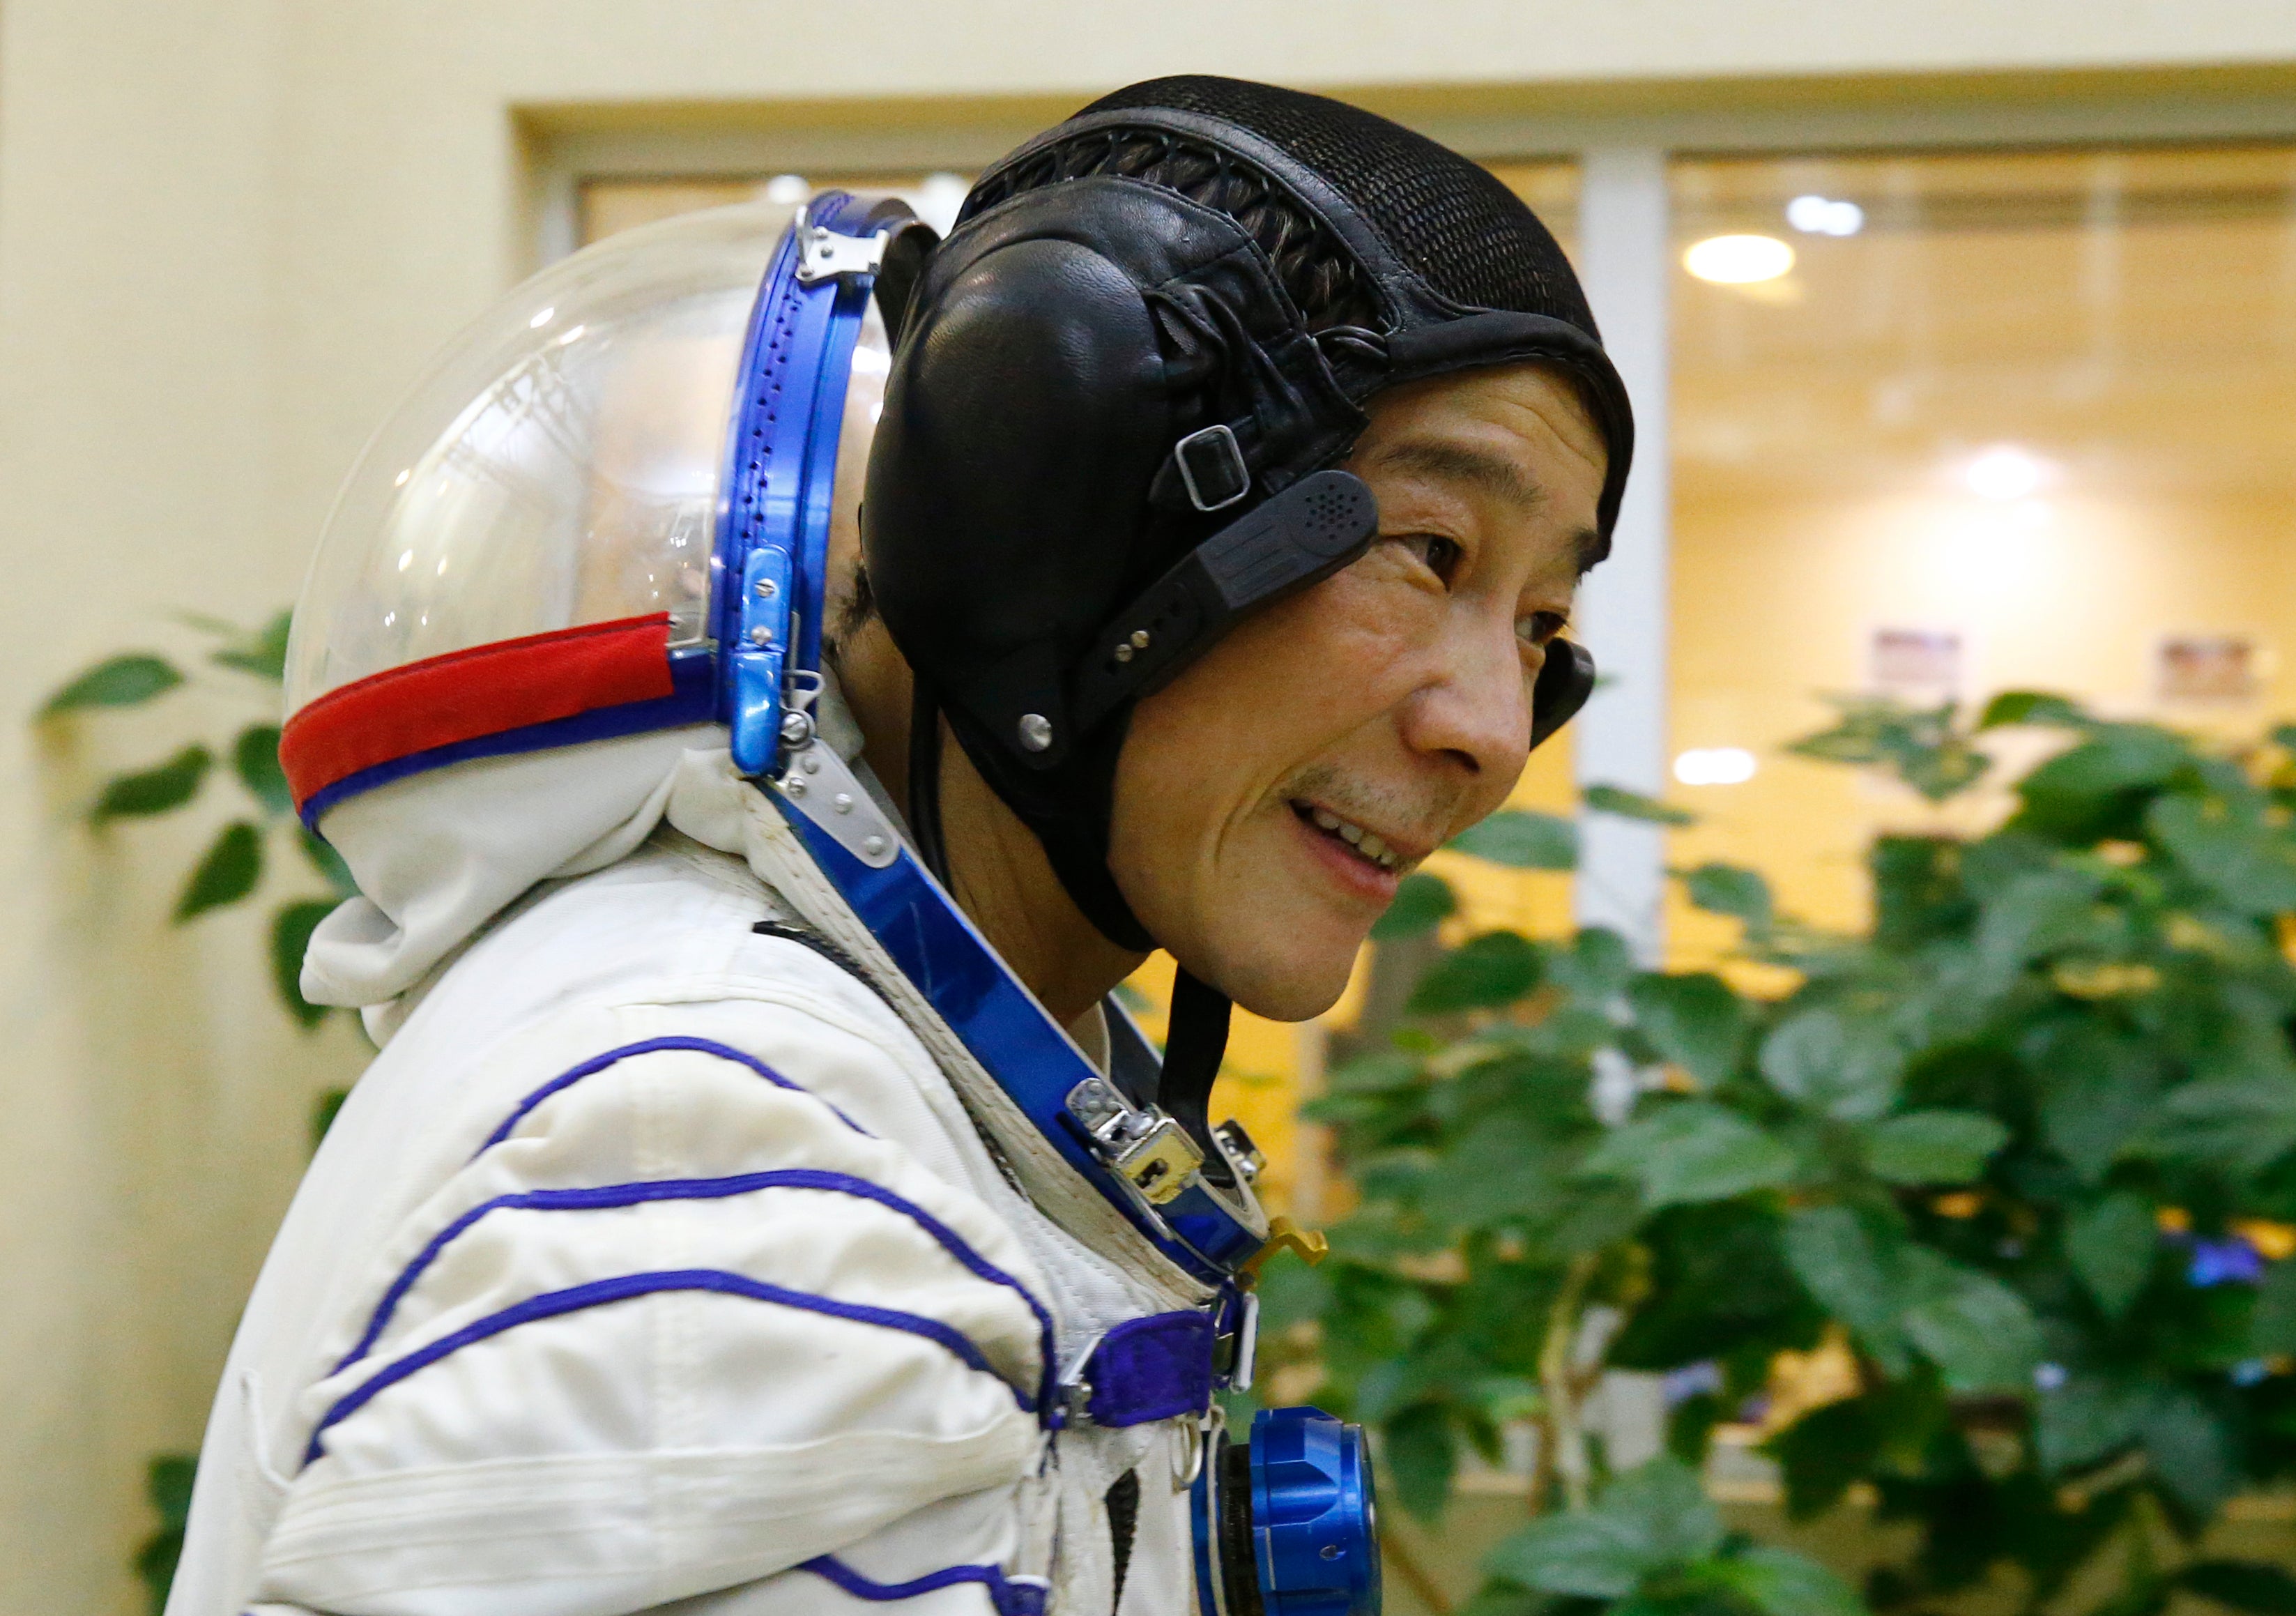 Yusaku Maezawa has been training for his space mission for months